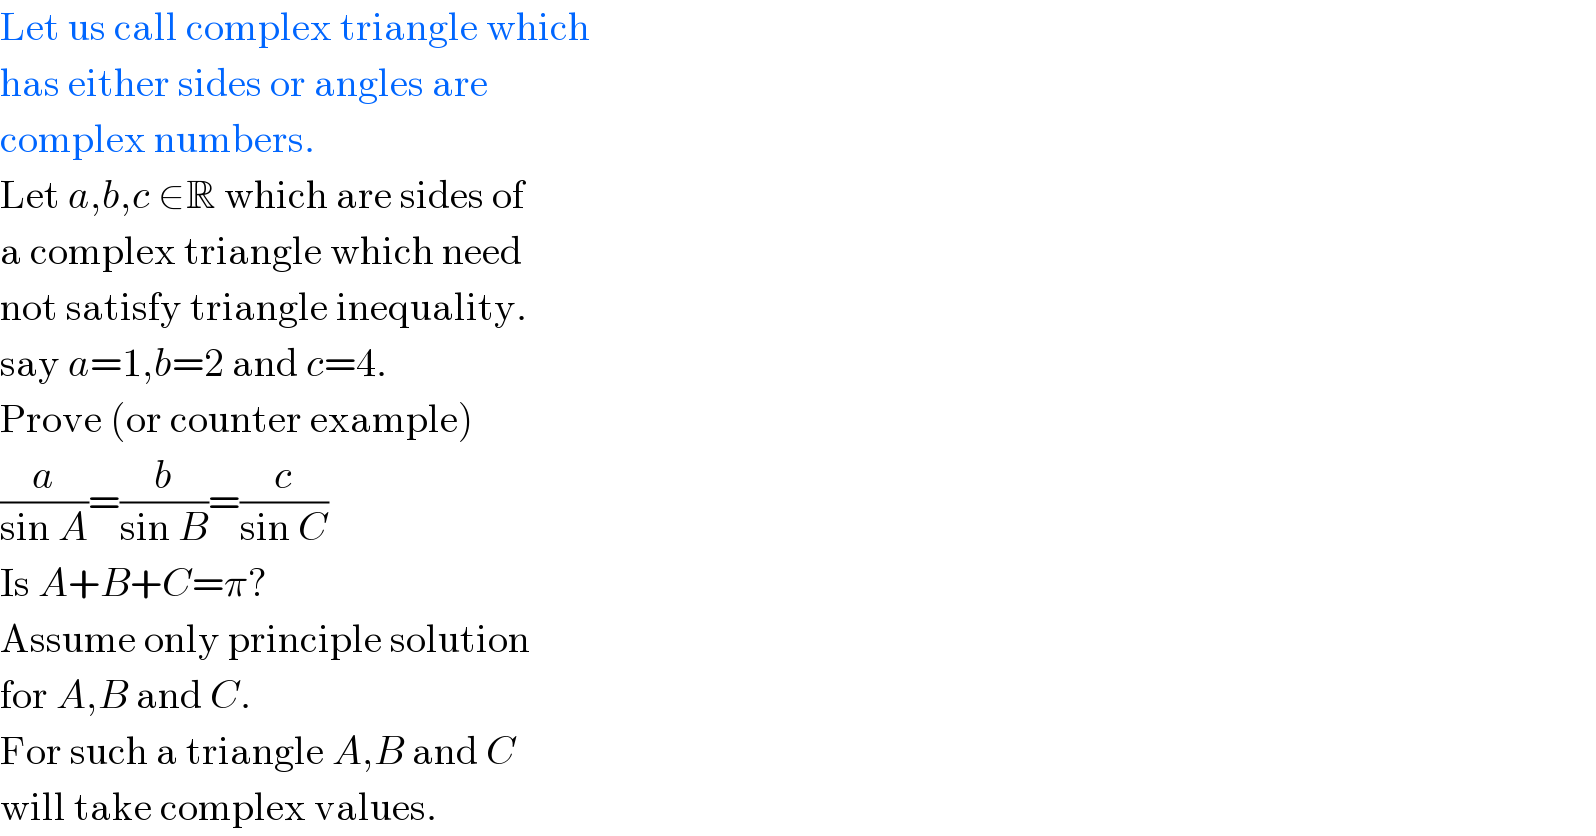 Let us call complex triangle which  has either sides or angles are  complex numbers.  Let a,b,c ∈R which are sides of  a complex triangle which need  not satisfy triangle inequality.  say a=1,b=2 and c=4.  Prove (or counter example)  (a/(sin A))=(b/(sin B))=(c/(sin C))  Is A+B+C=π?  Assume only principle solution  for A,B and C.  For such a triangle A,B and C  will take complex values.  